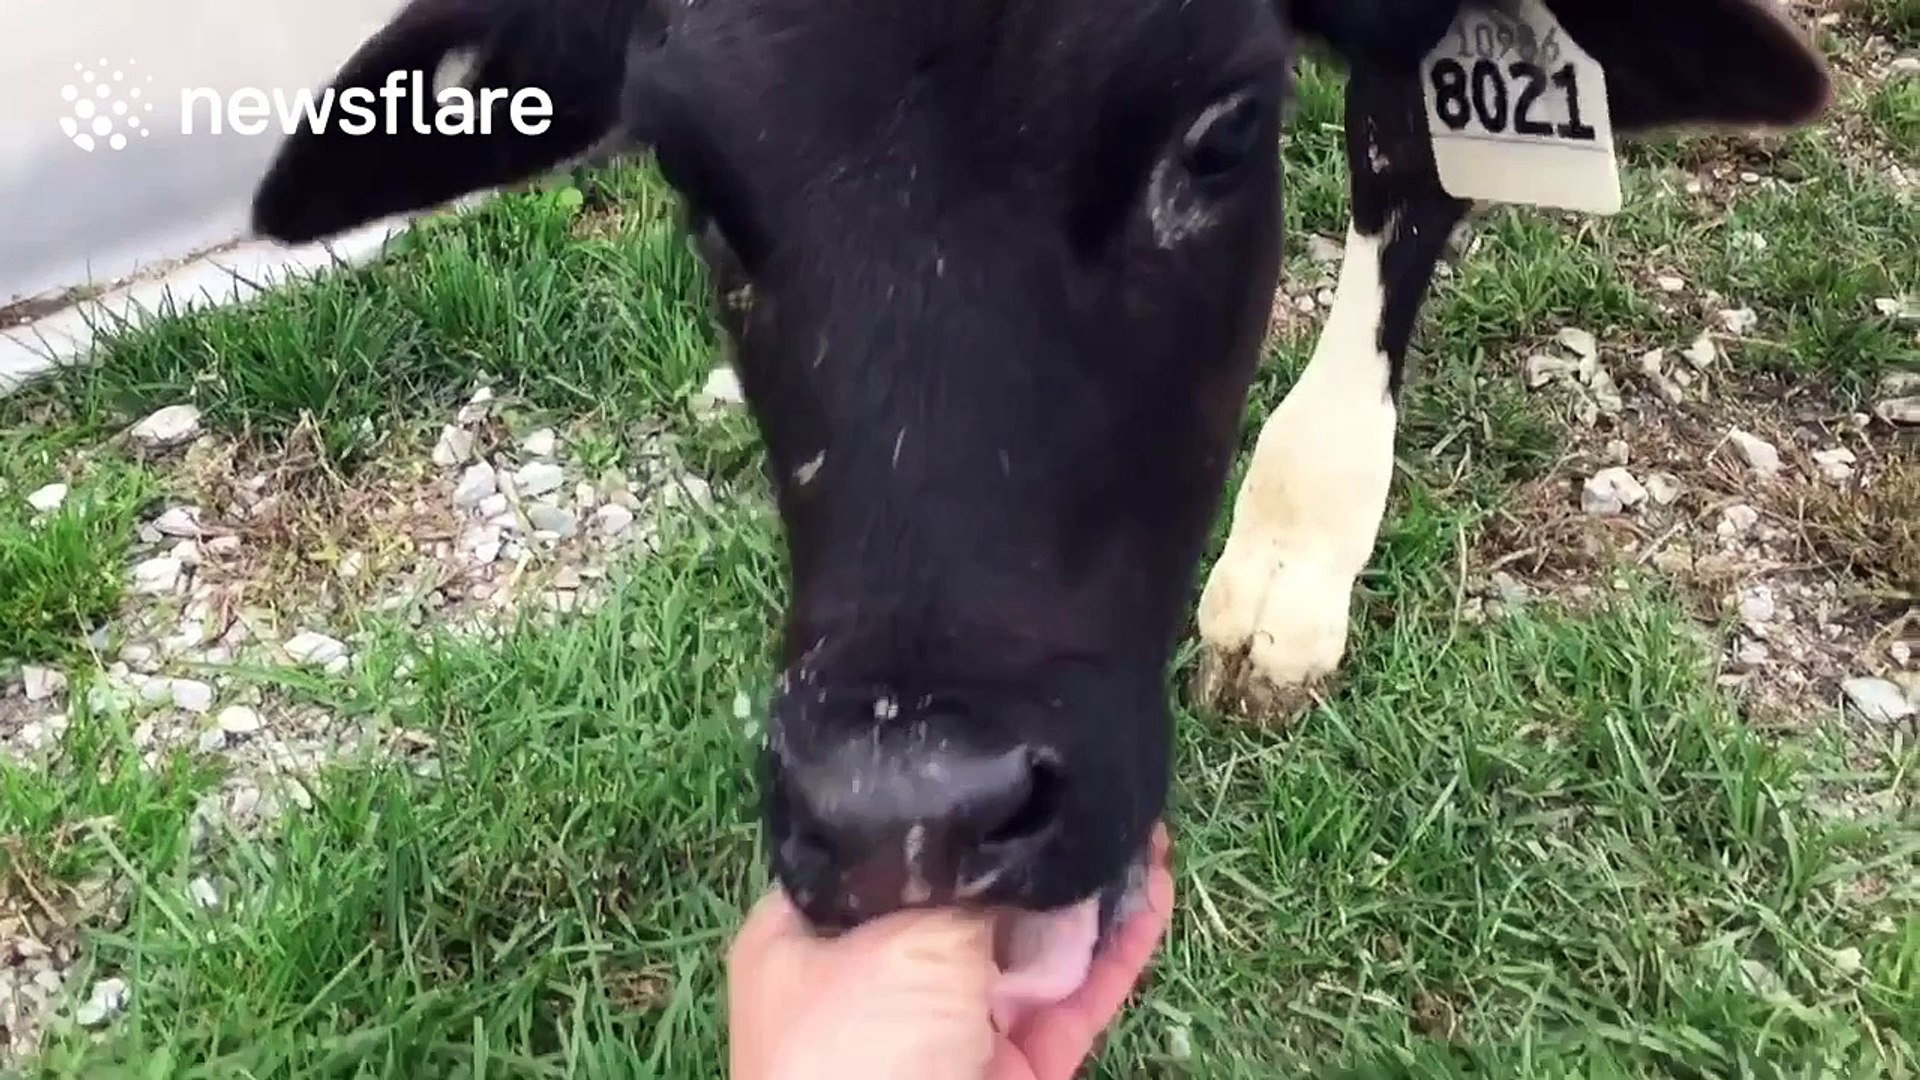 Man sucked off by calf